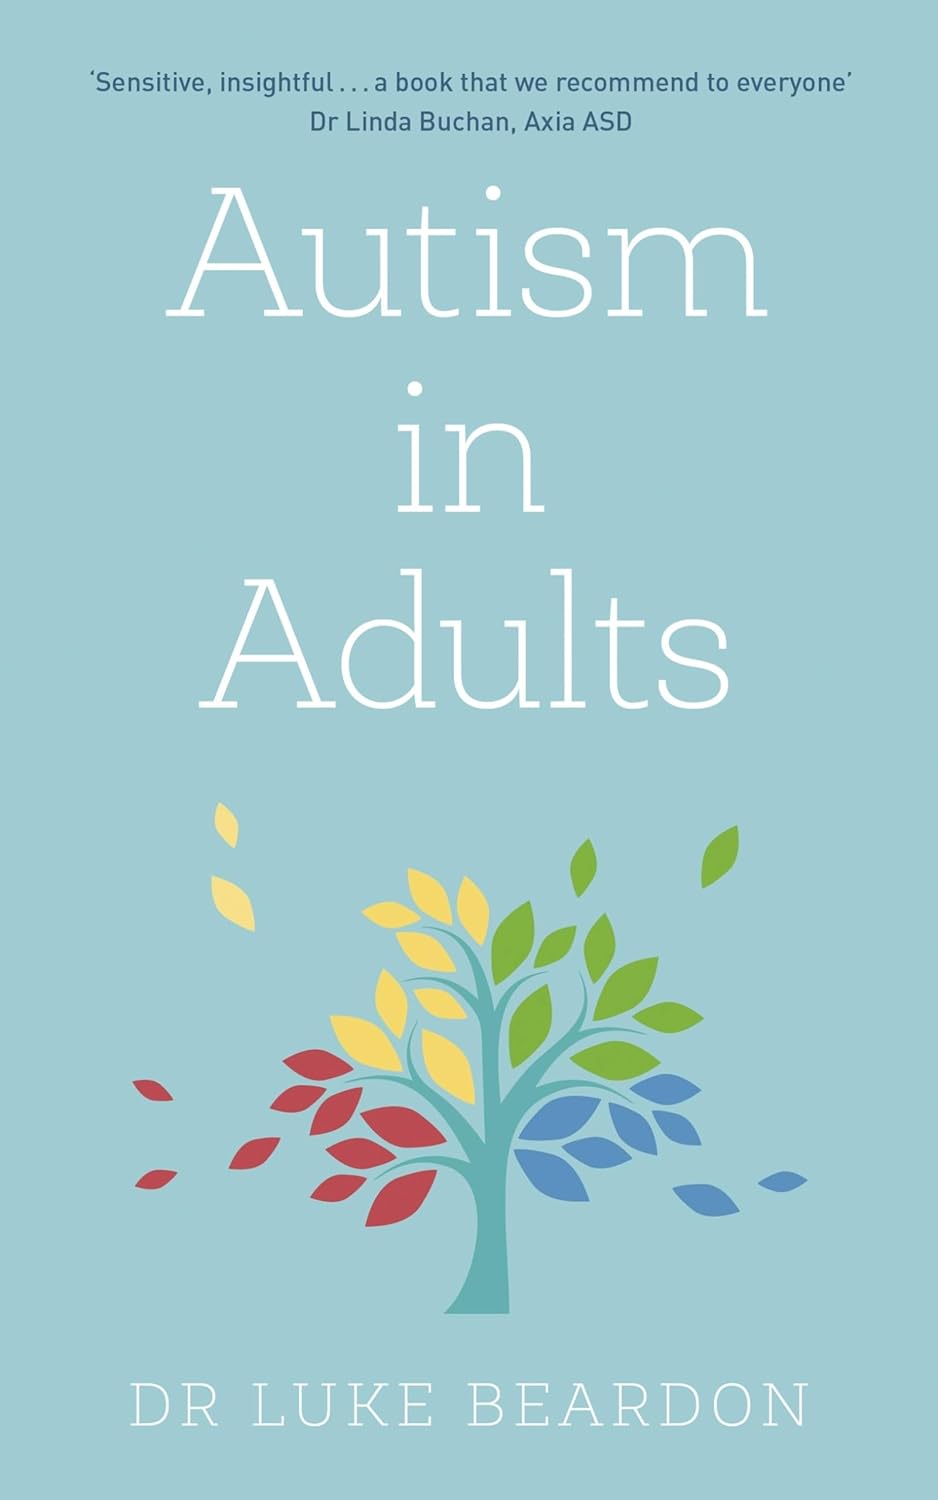 Autism in Adults (2021, Hodder & Stoughton)